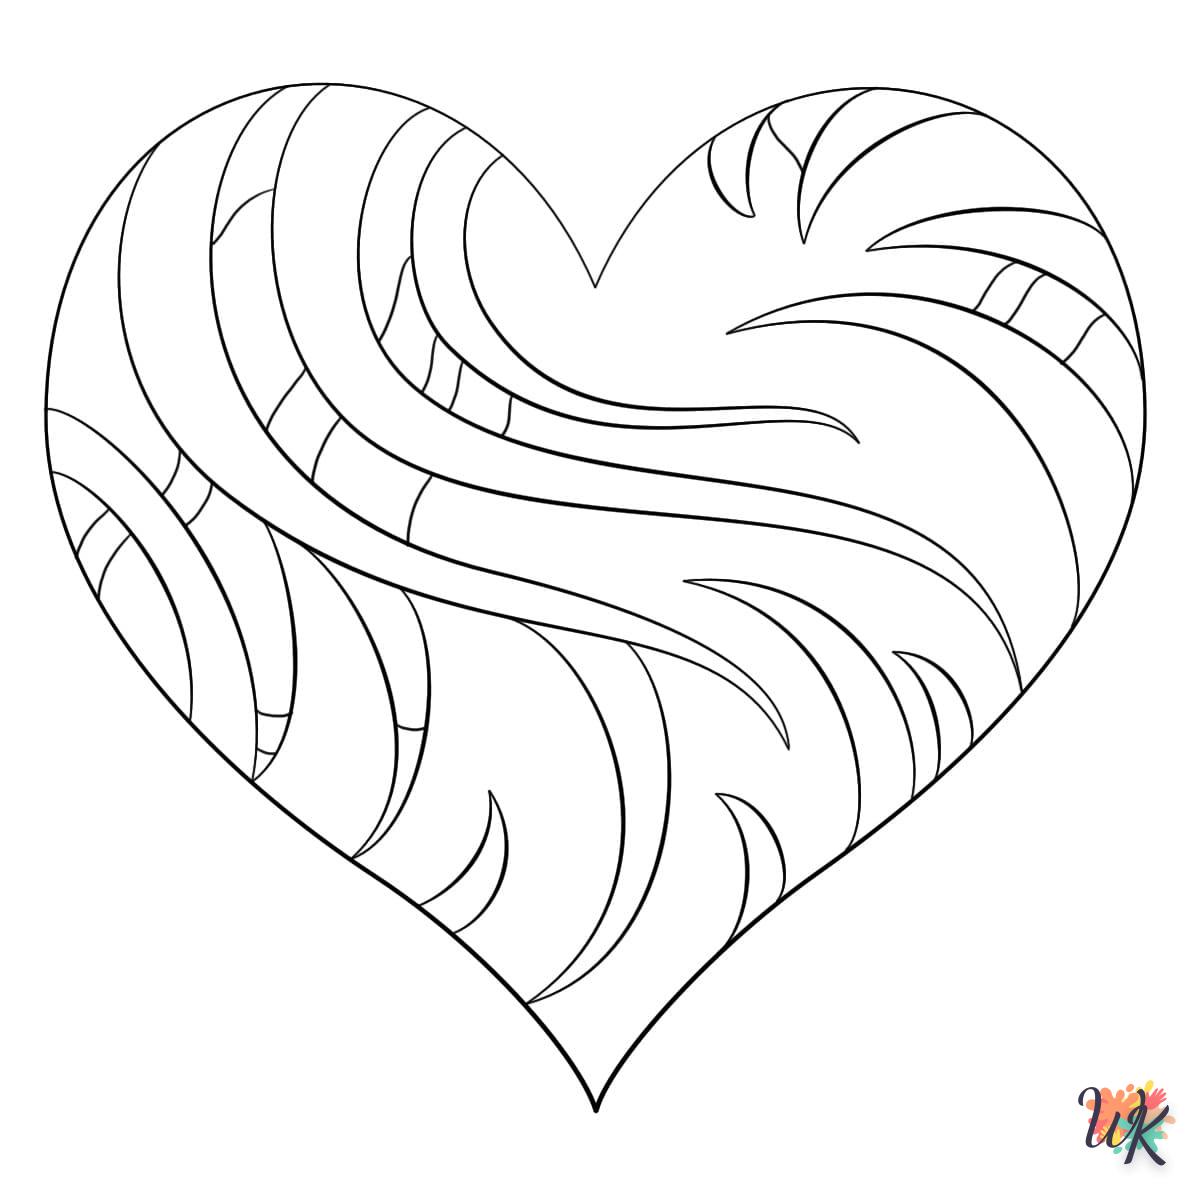 Heart coloring page for a 7 year old child to print